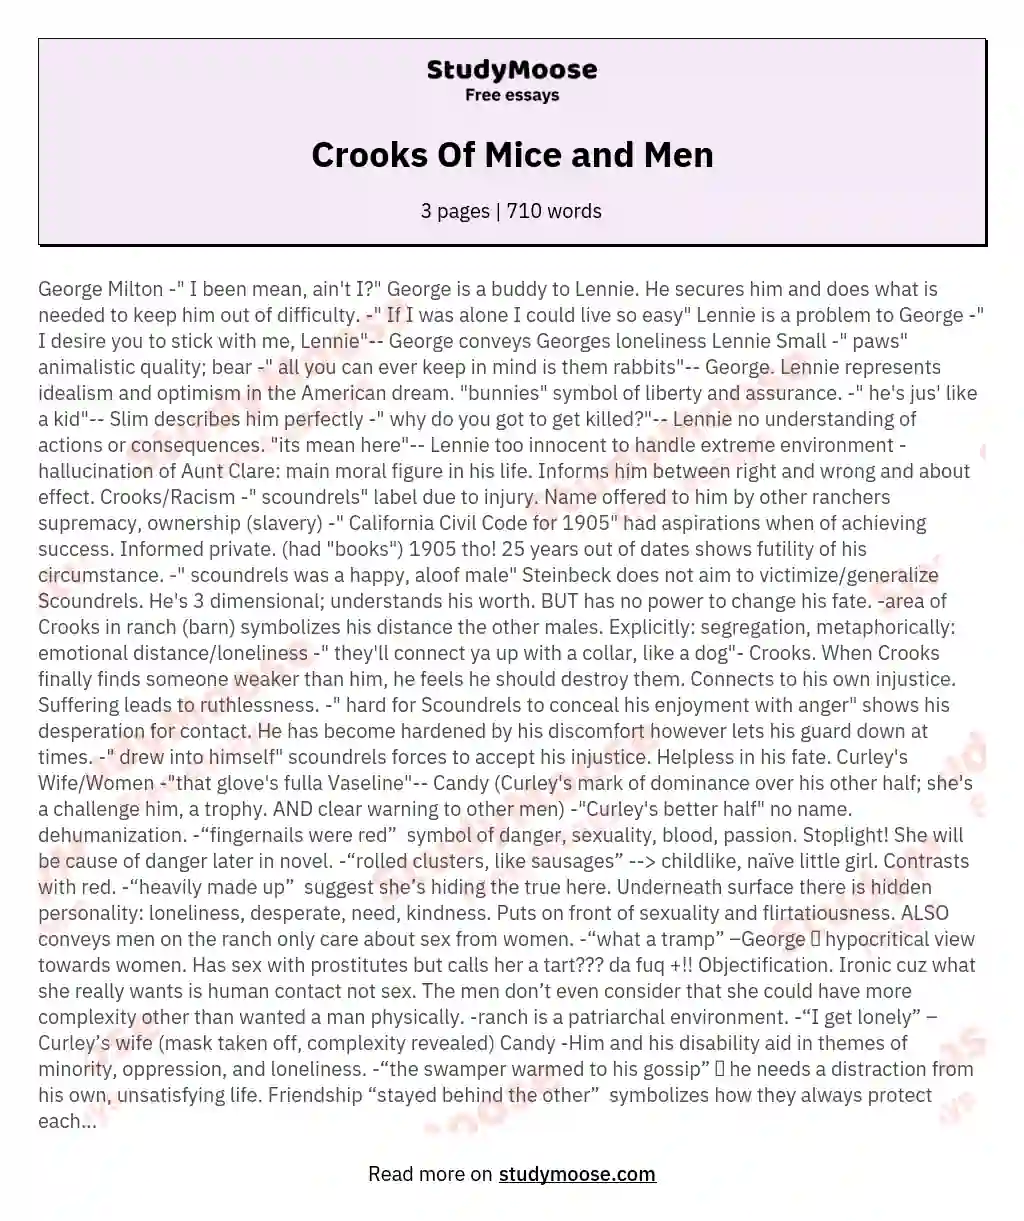 Crooks Of Mice and Men essay